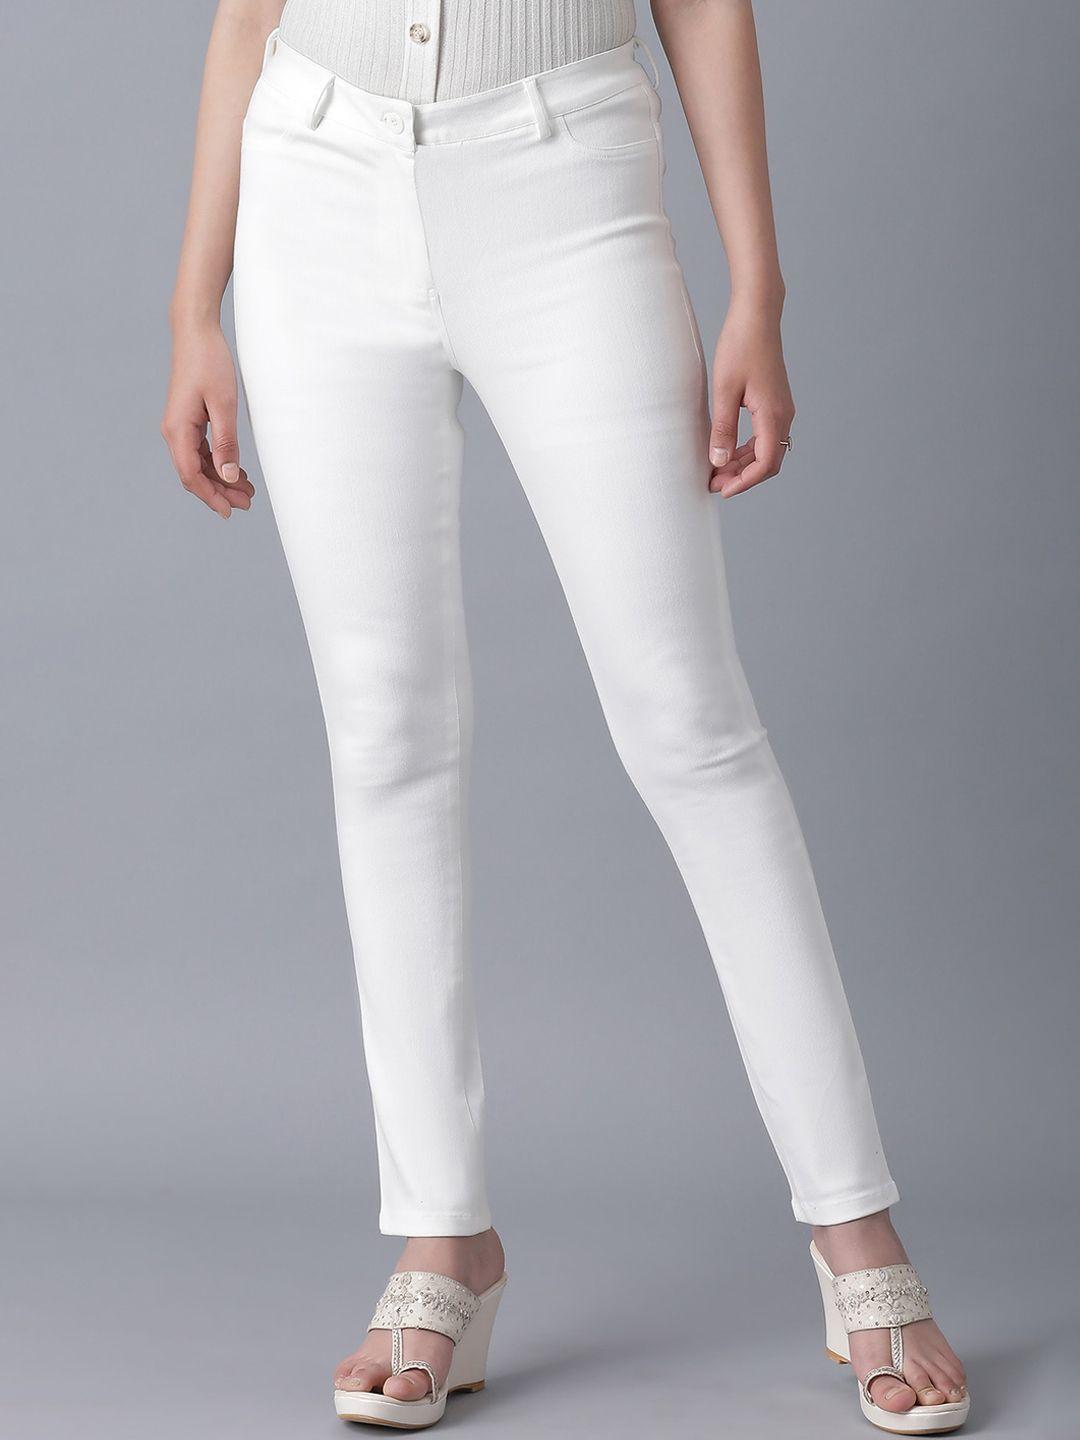 w women white slim fit mid-rise clean look stretchable jeans